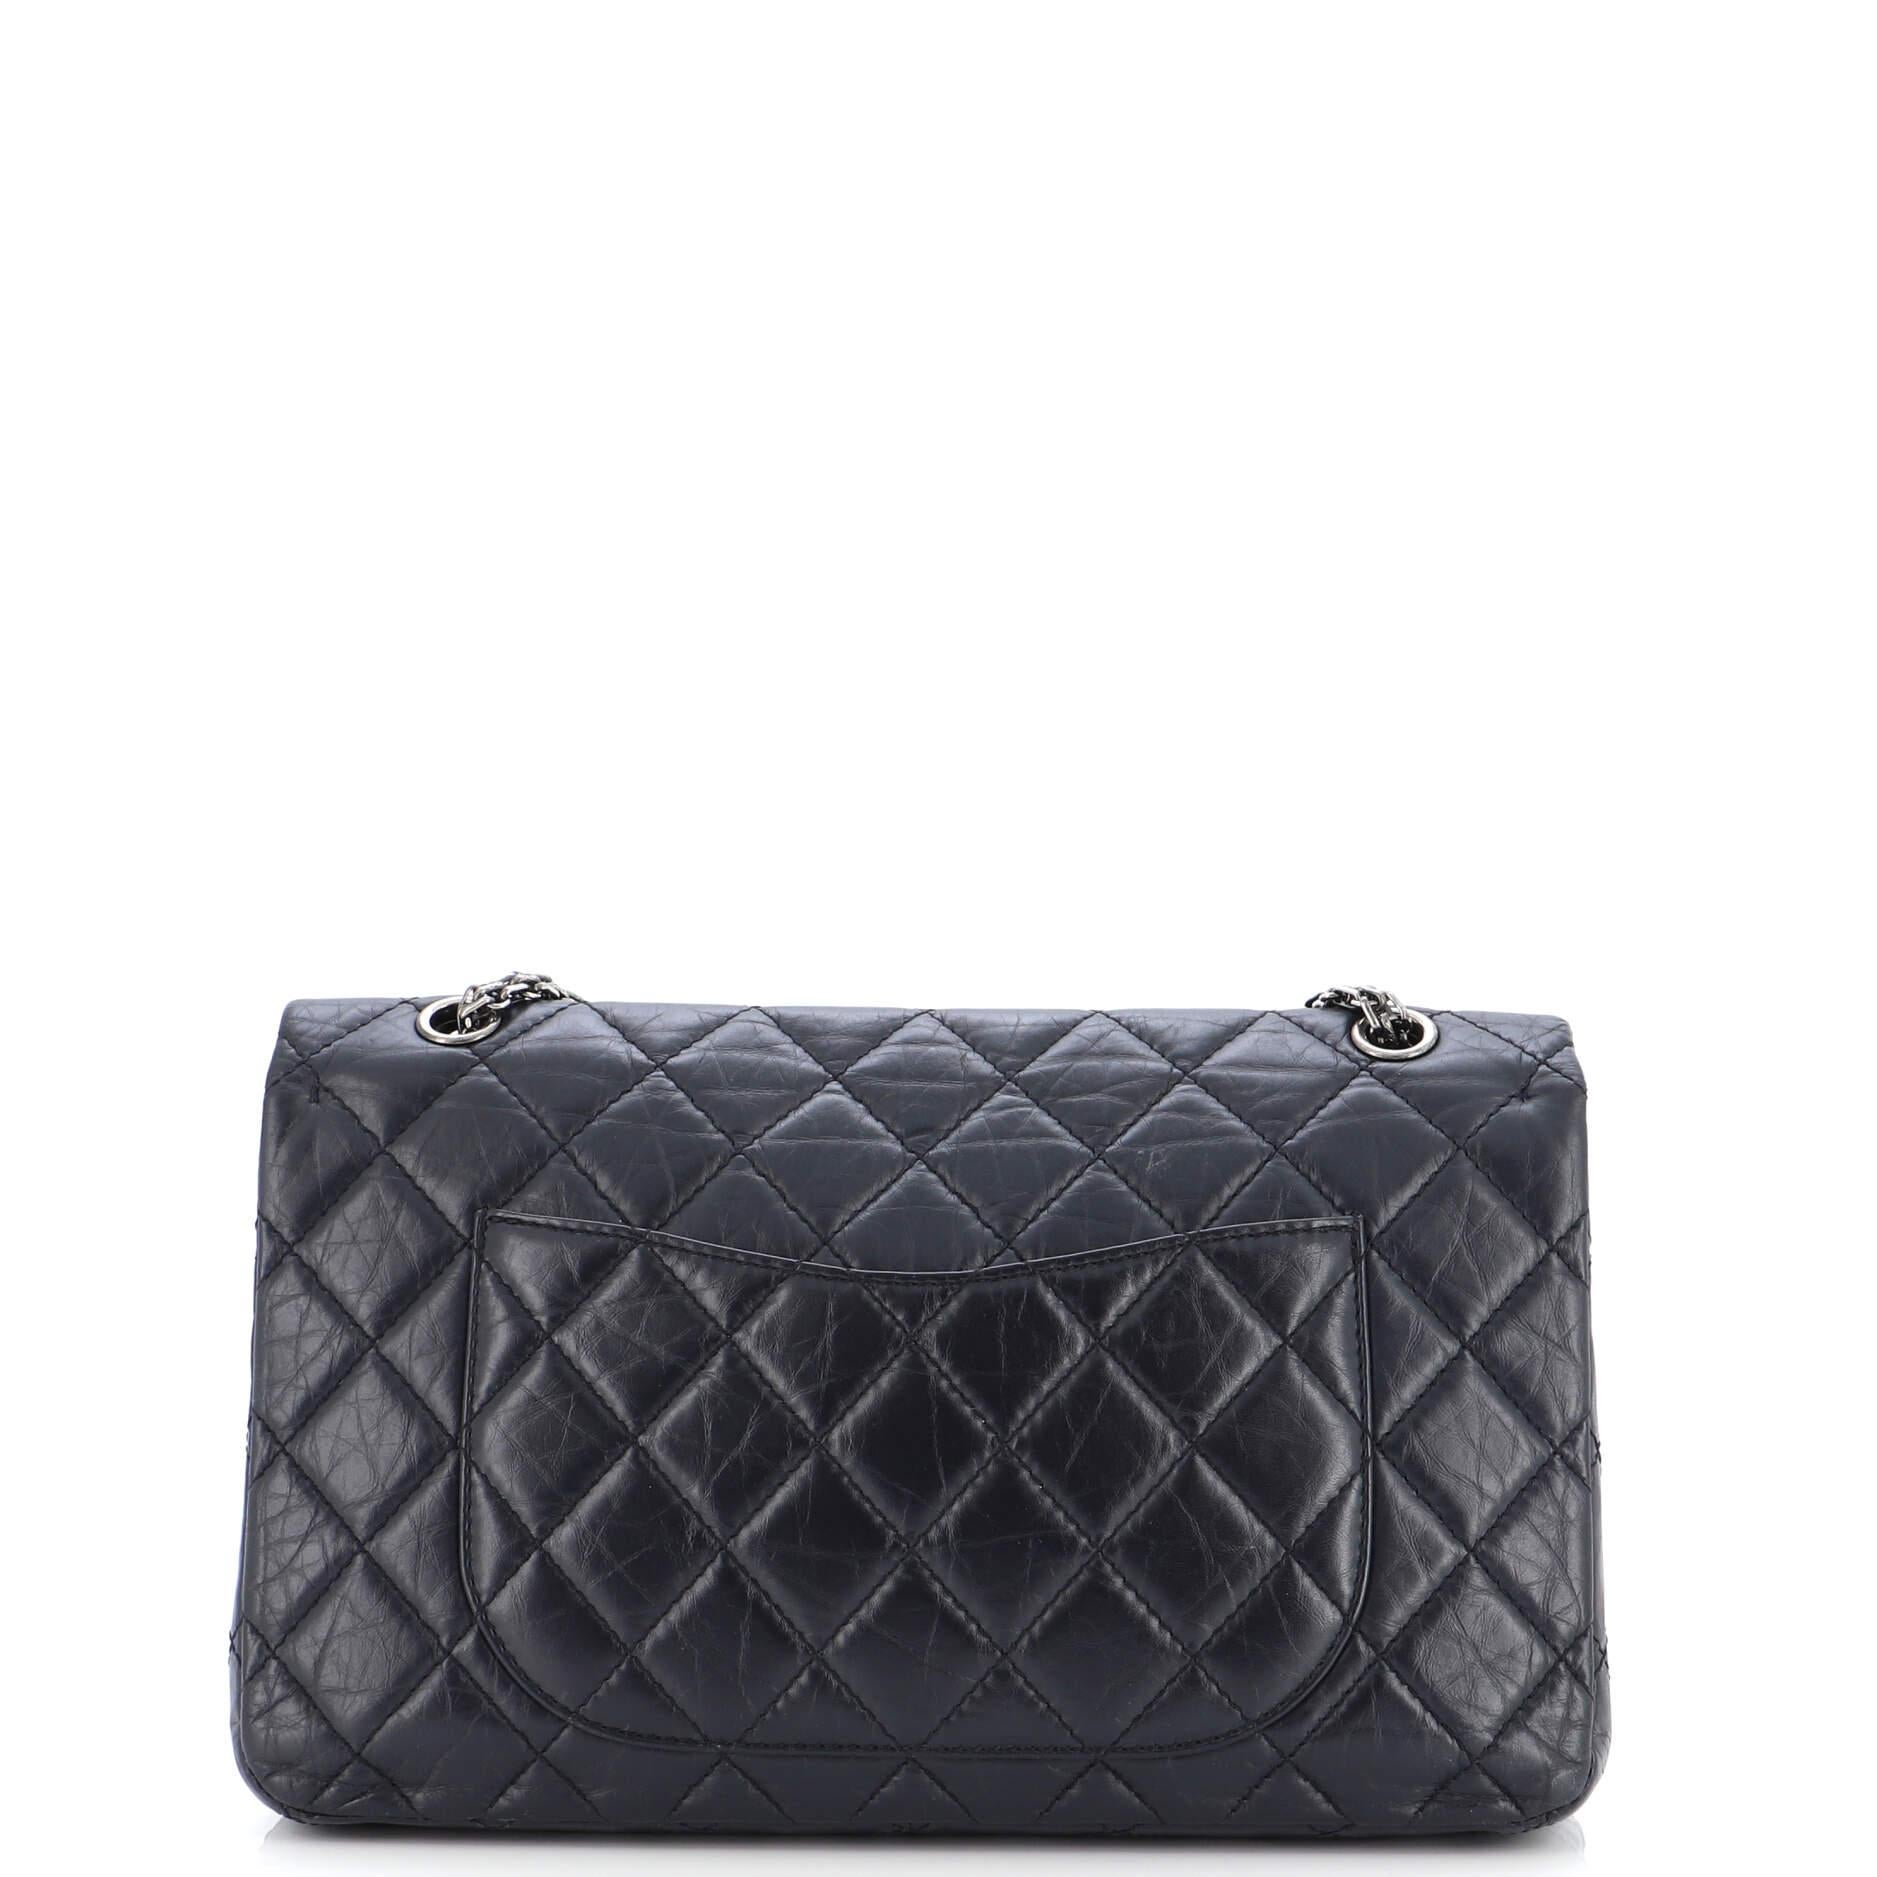 Women's Chanel Reissue 2.55 Flap Bag Quilted Aged Calfskin 227